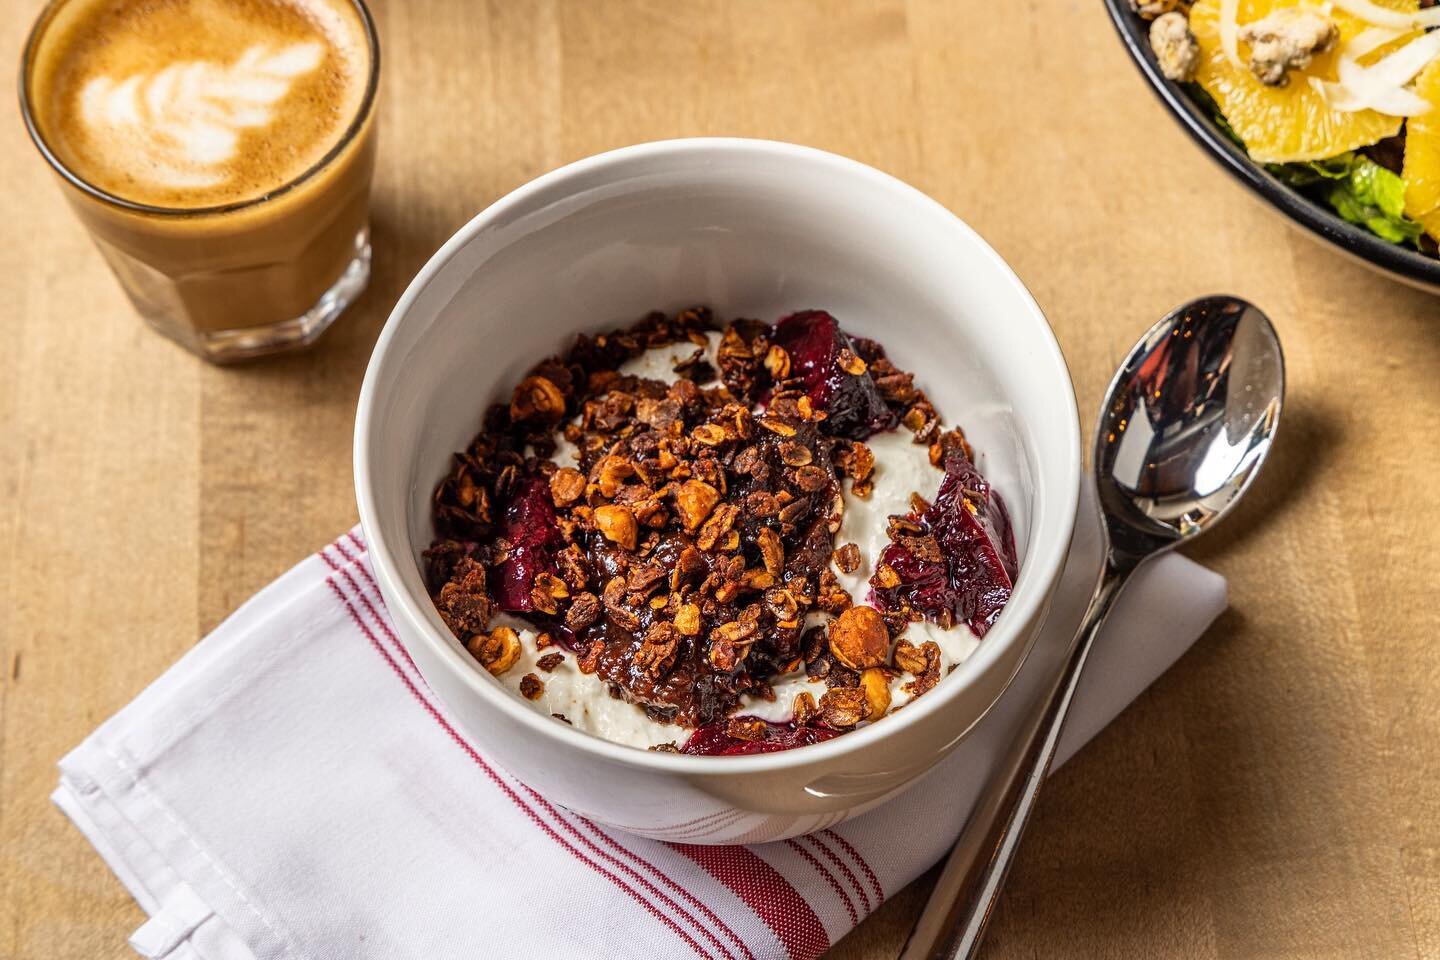 All day breakfast @mercantileandmash means Monday starts when you do ☕️ 

📷: House Ricotta Bowl currently features blueberry preserves, pumpkin seed and pecan granola

#thecigarfactory&nbsp;#MercandMash&nbsp;#TheIndigoRoad&nbsp;#eaterchs&nbsp;#chsto